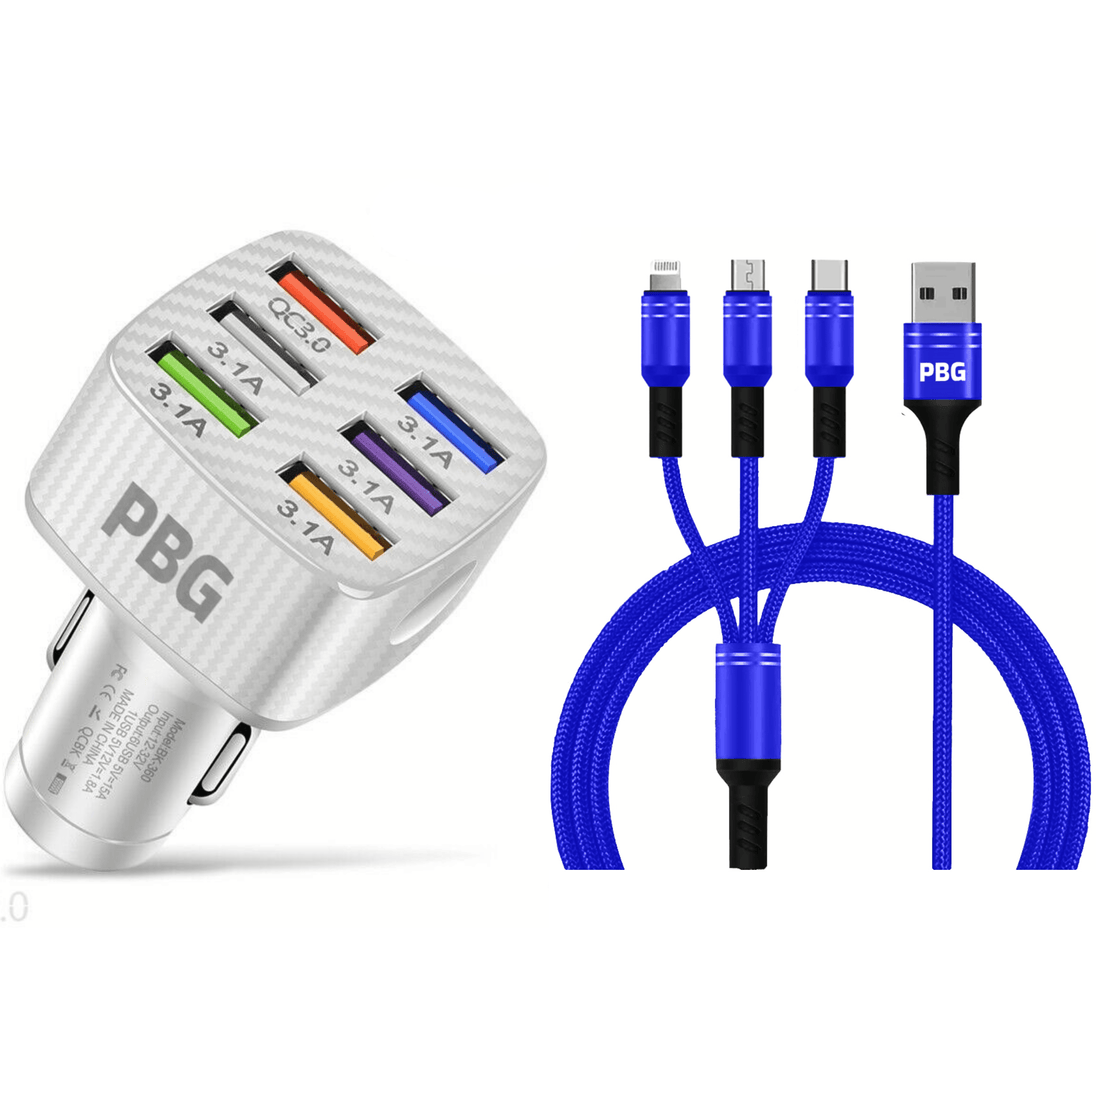 Blue iPhone cable, Android cable, Micro Usb charging cable 3 in 1  with 6 port Led car charger 4ft